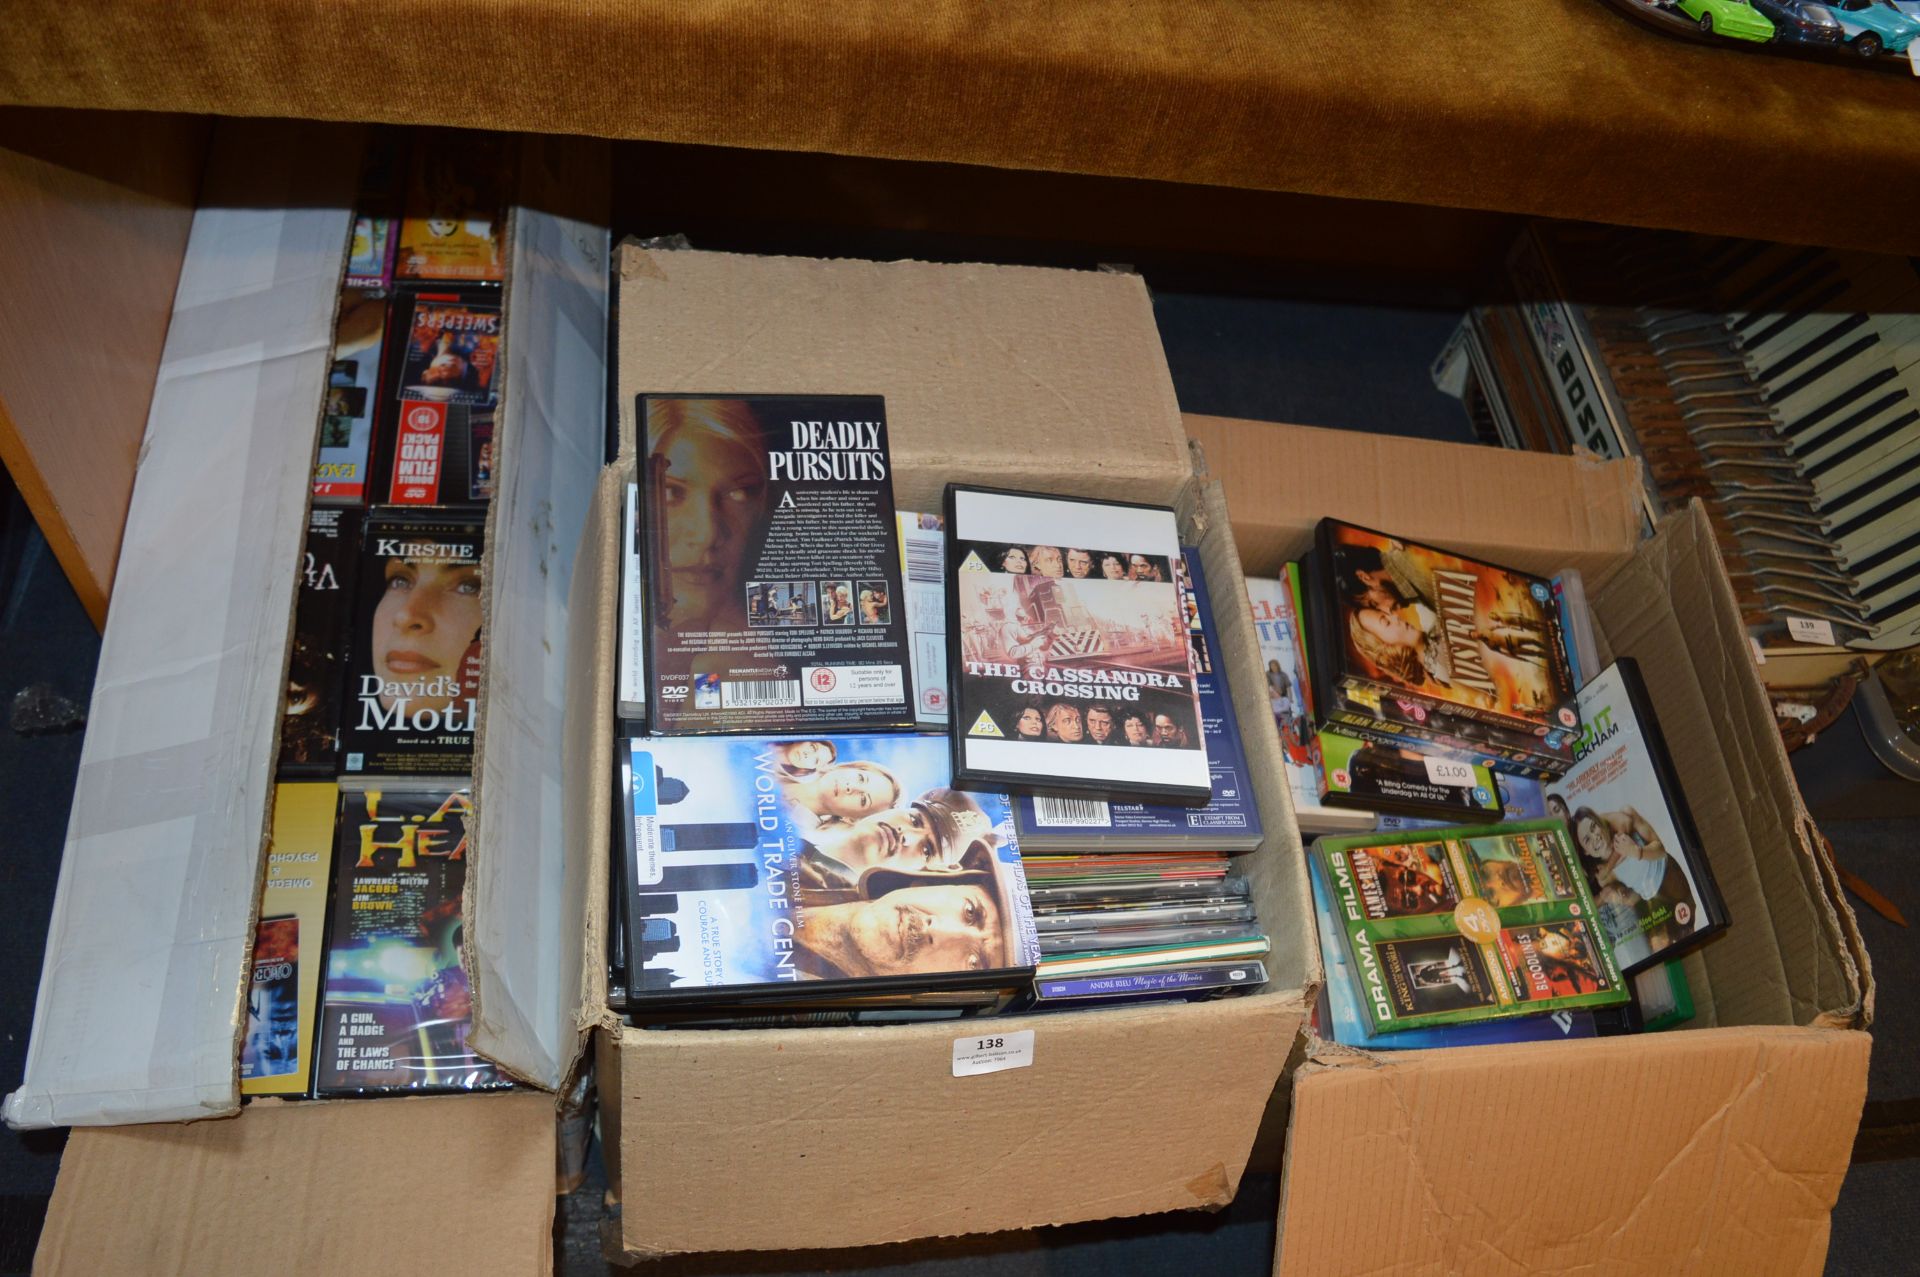 Three Boxes Containing DVDs and CDs